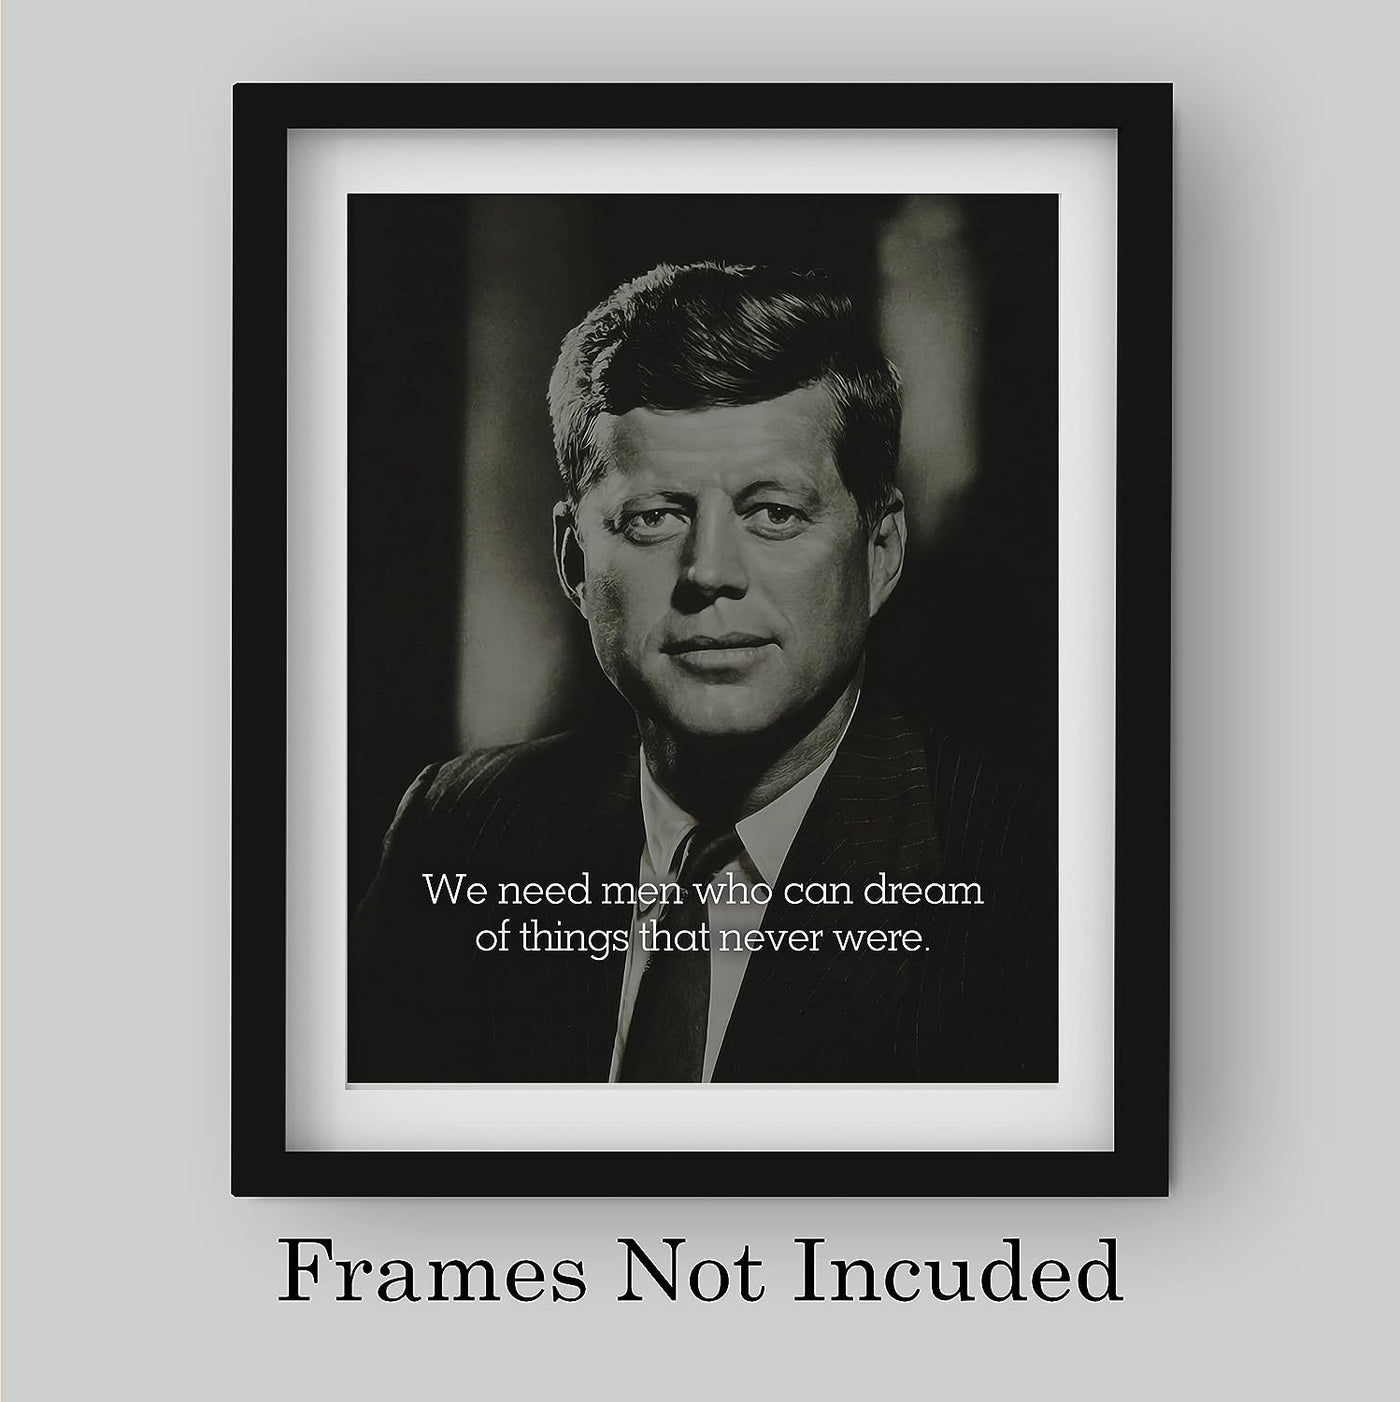 John F. Kennedy Quotes-"We Need Men Who Can Dream"-Political Wall Art -8 x 10" JFK Presidential Portrait Print -Ready to Frame. Patriotic Home-Office-School-Library Decor! Great Historical Gift!